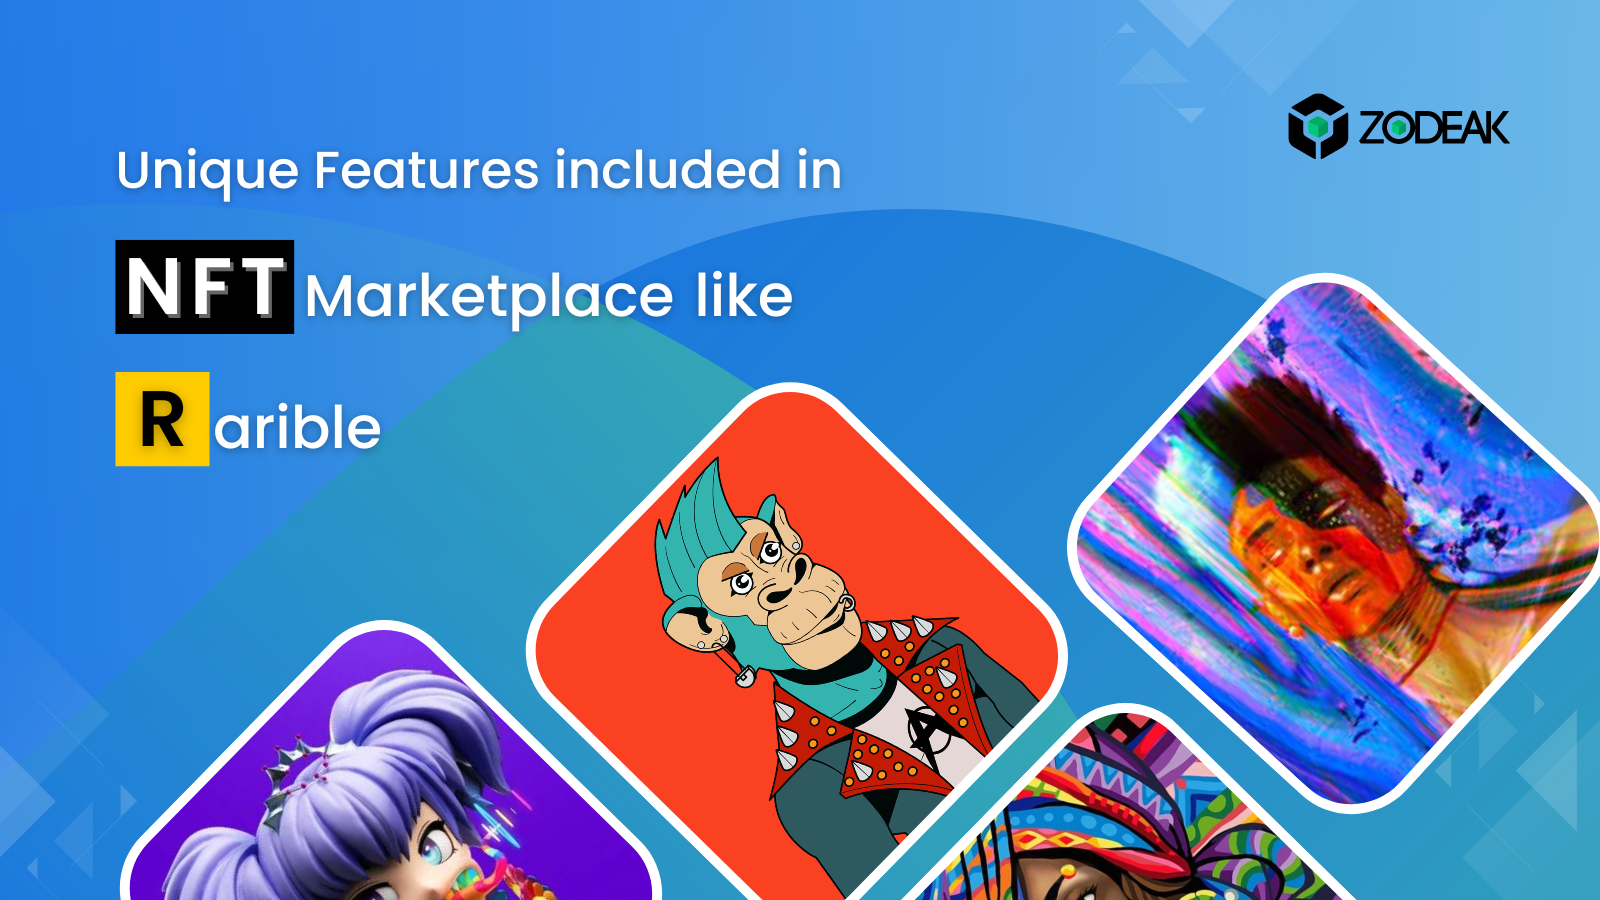 What are the Unique features included in Zodeak’s NFT Marketplace like Rarible?